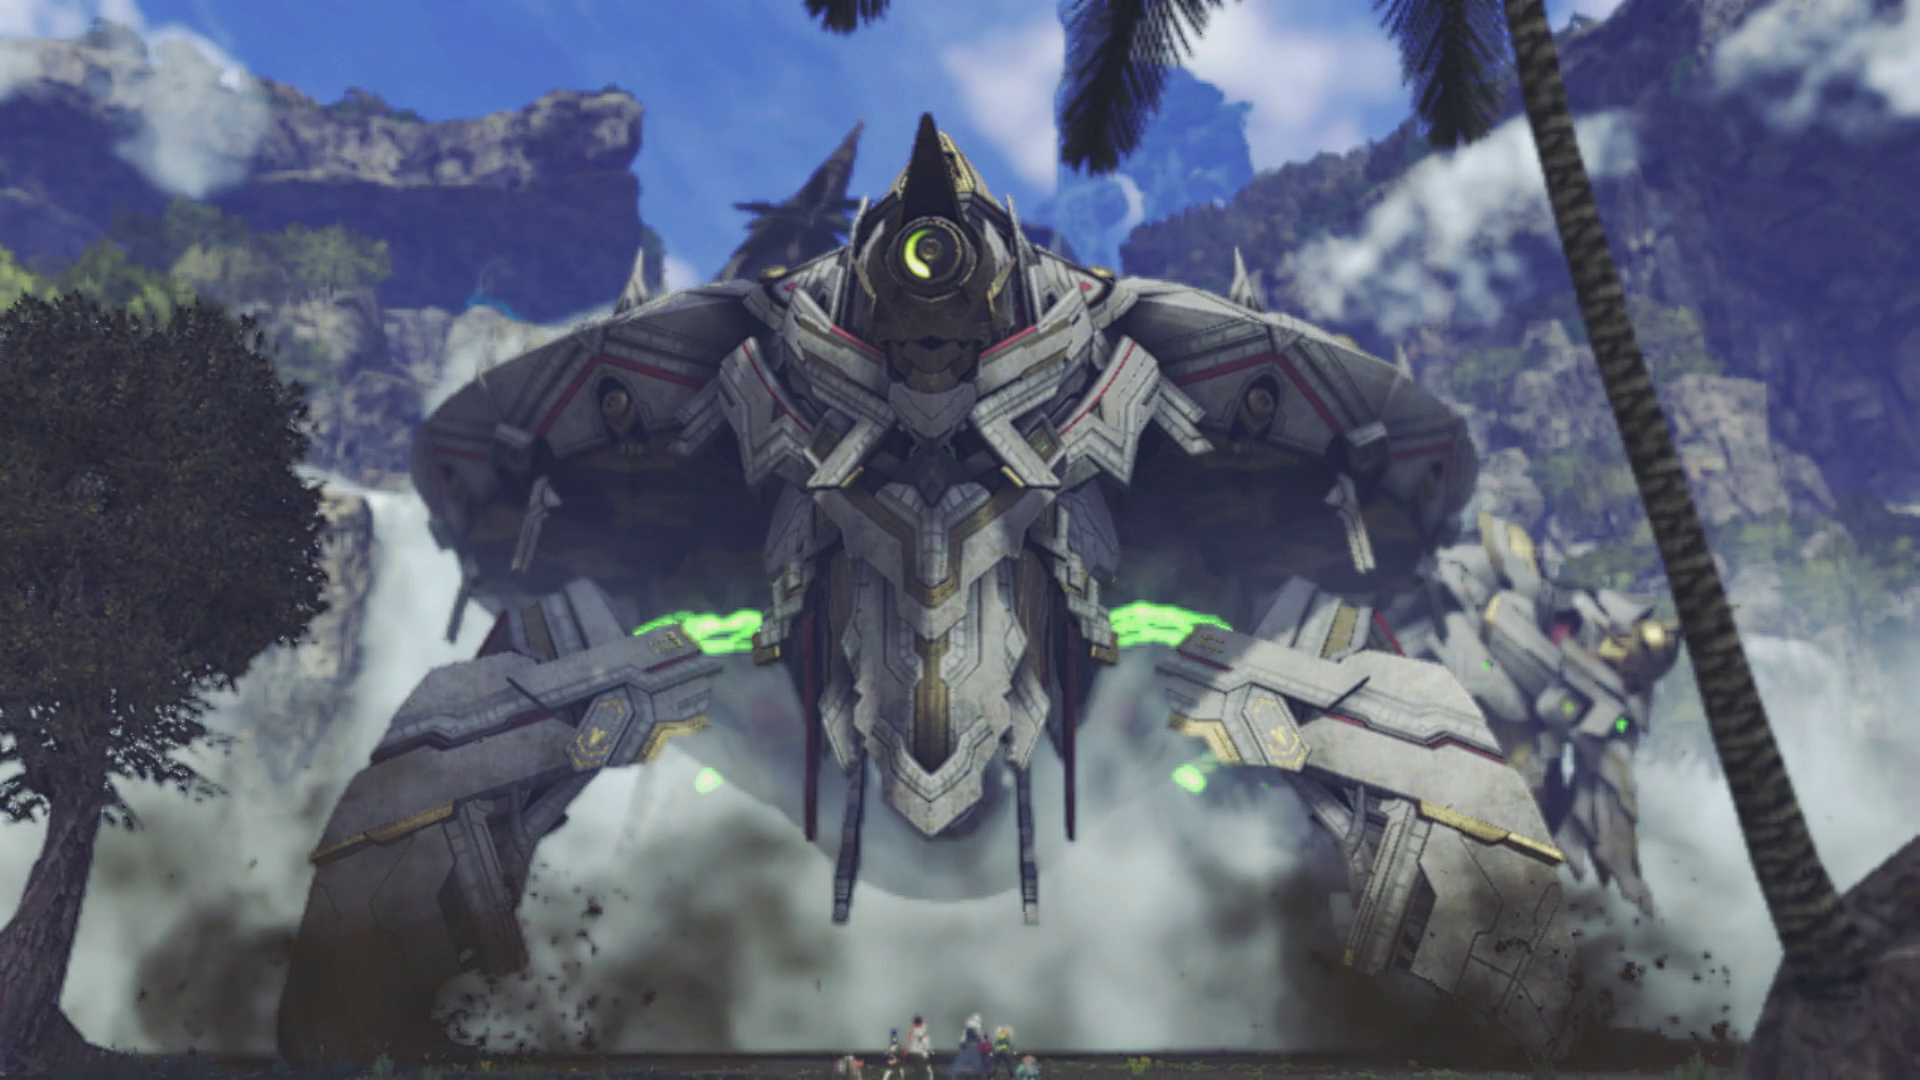 Xenoblade Chronicles 3 moves its release date up to July 29 ahead of its  originally slated September release